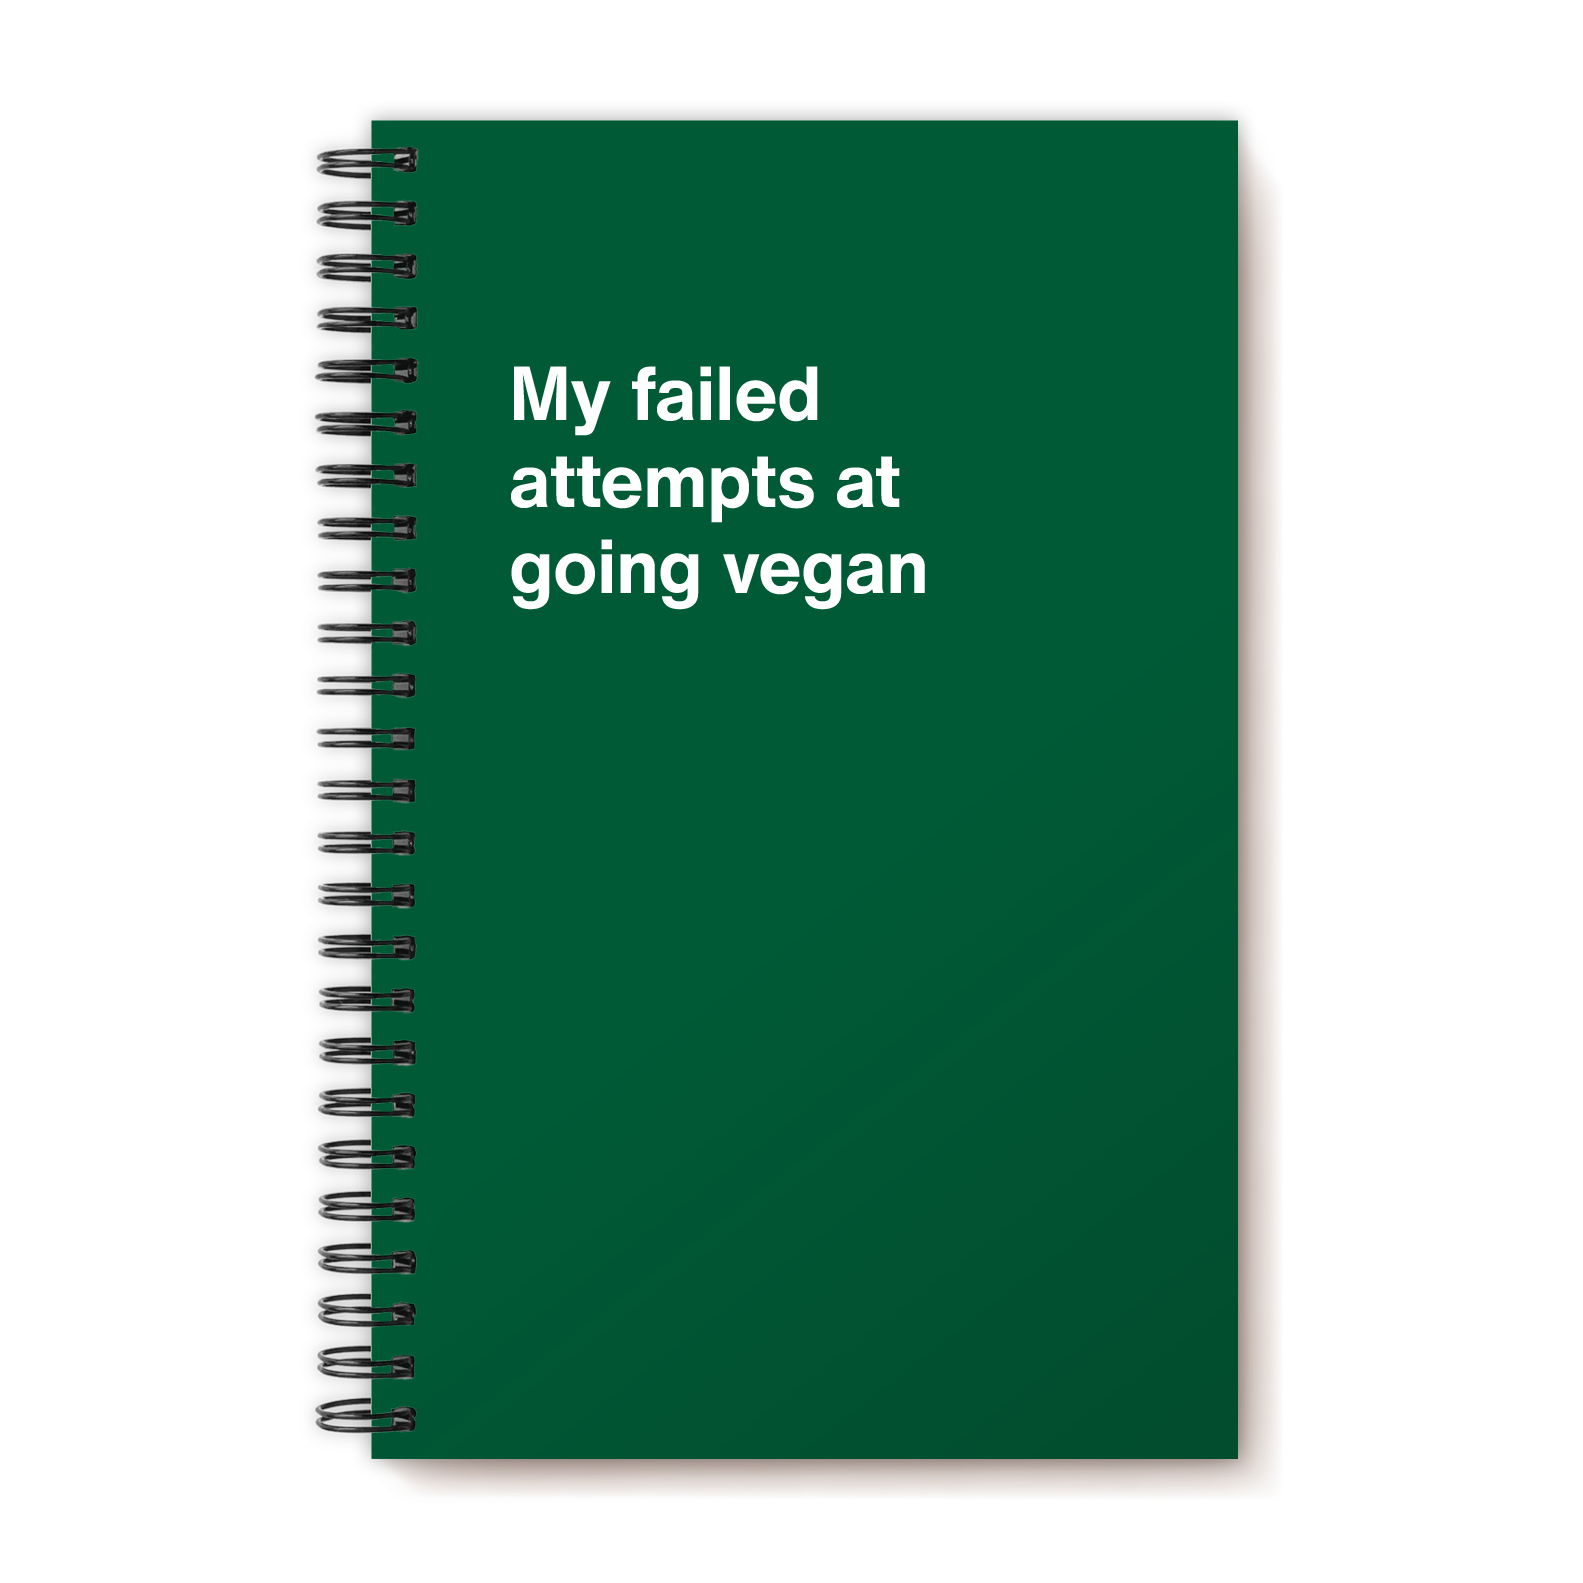 My failed attempts at going vegan